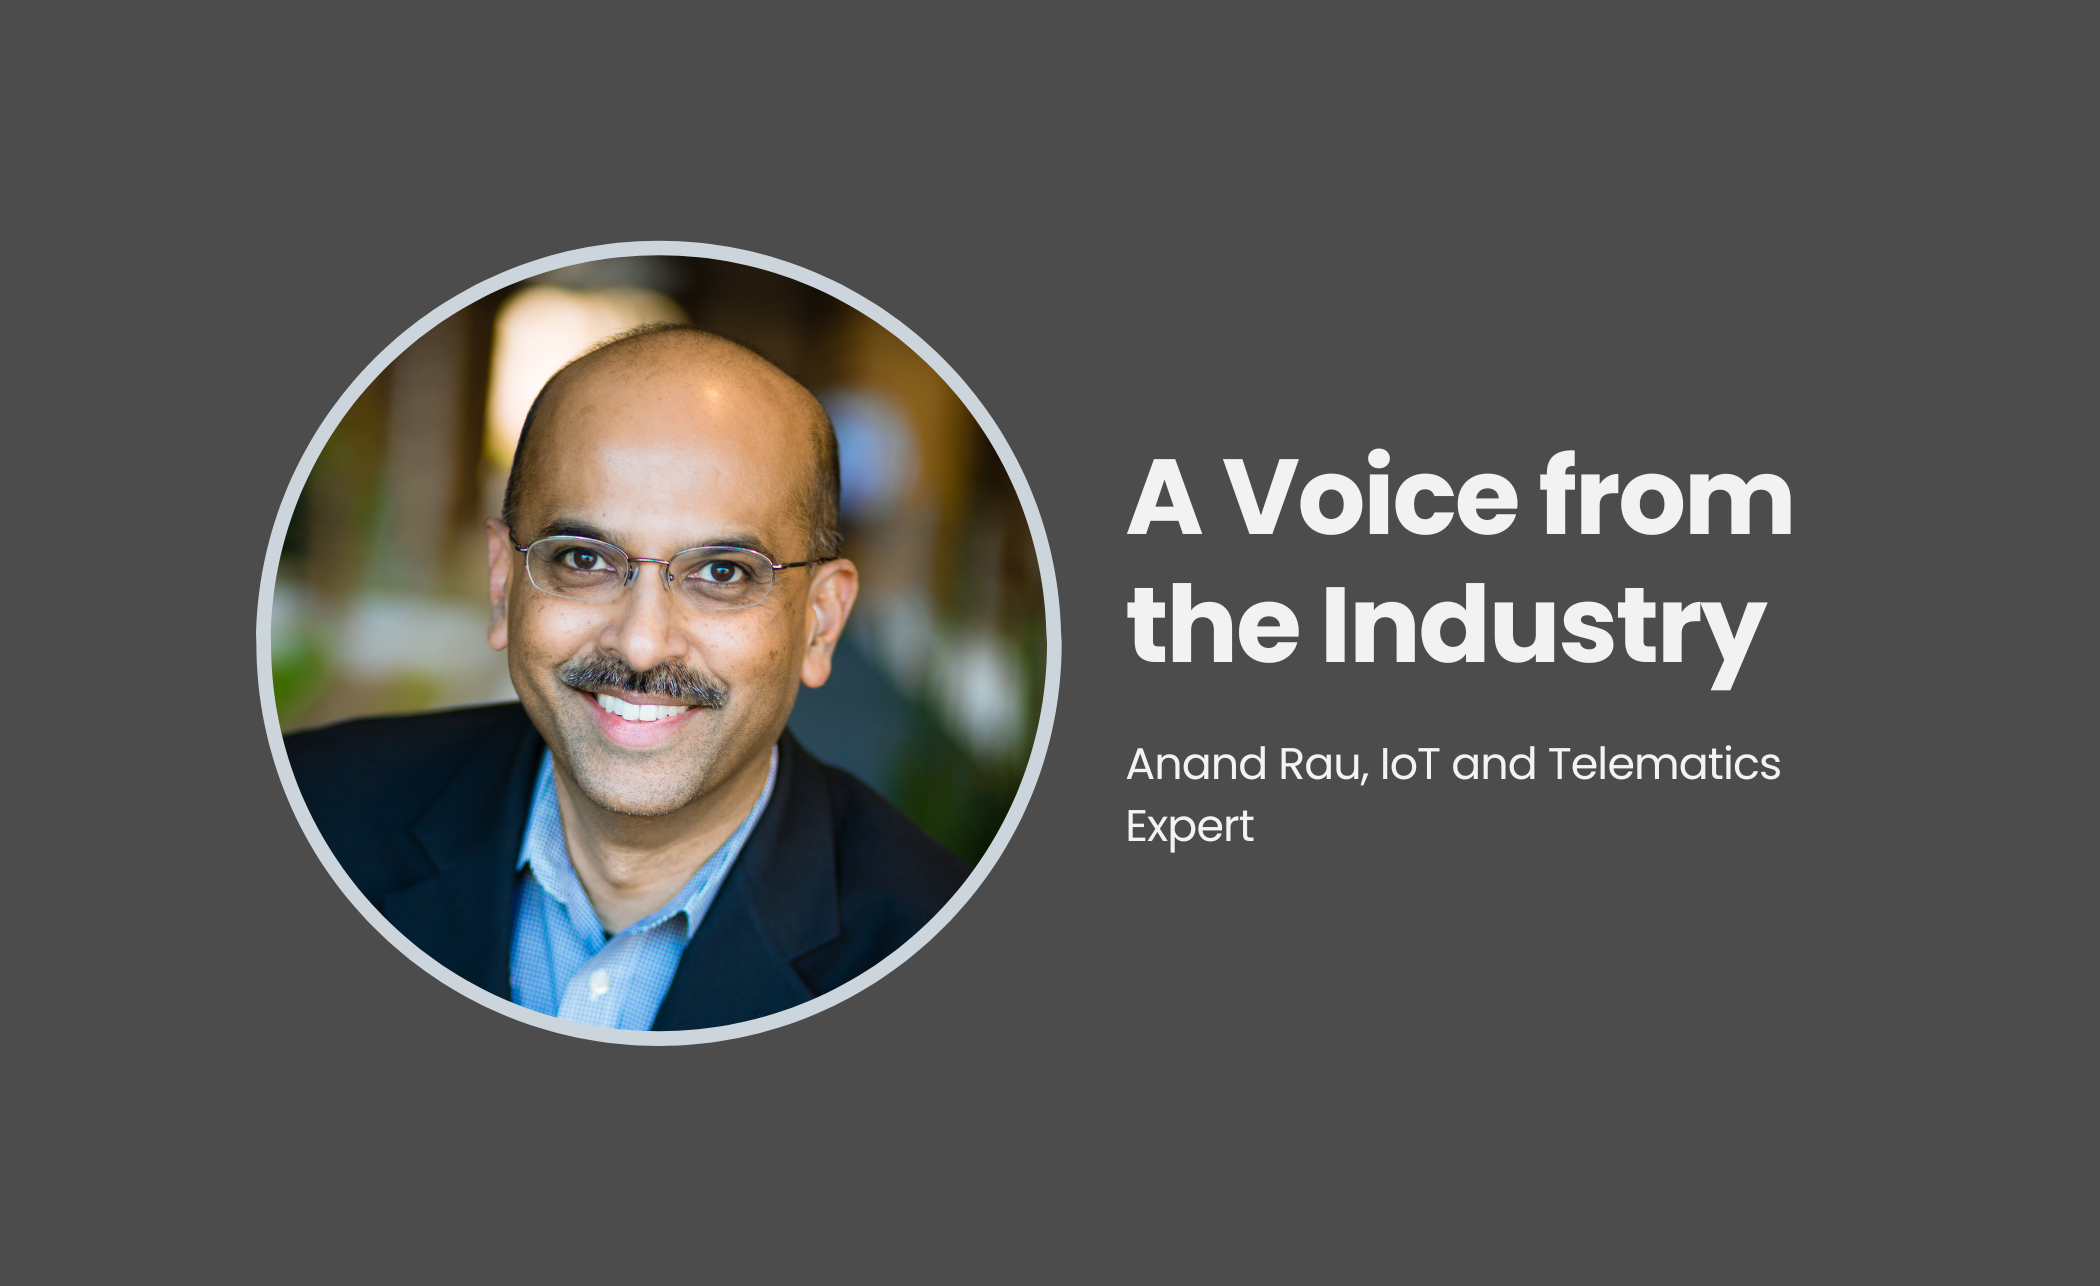 A Voice from the Industry: Anand Rau, IoT and Telematics Expert